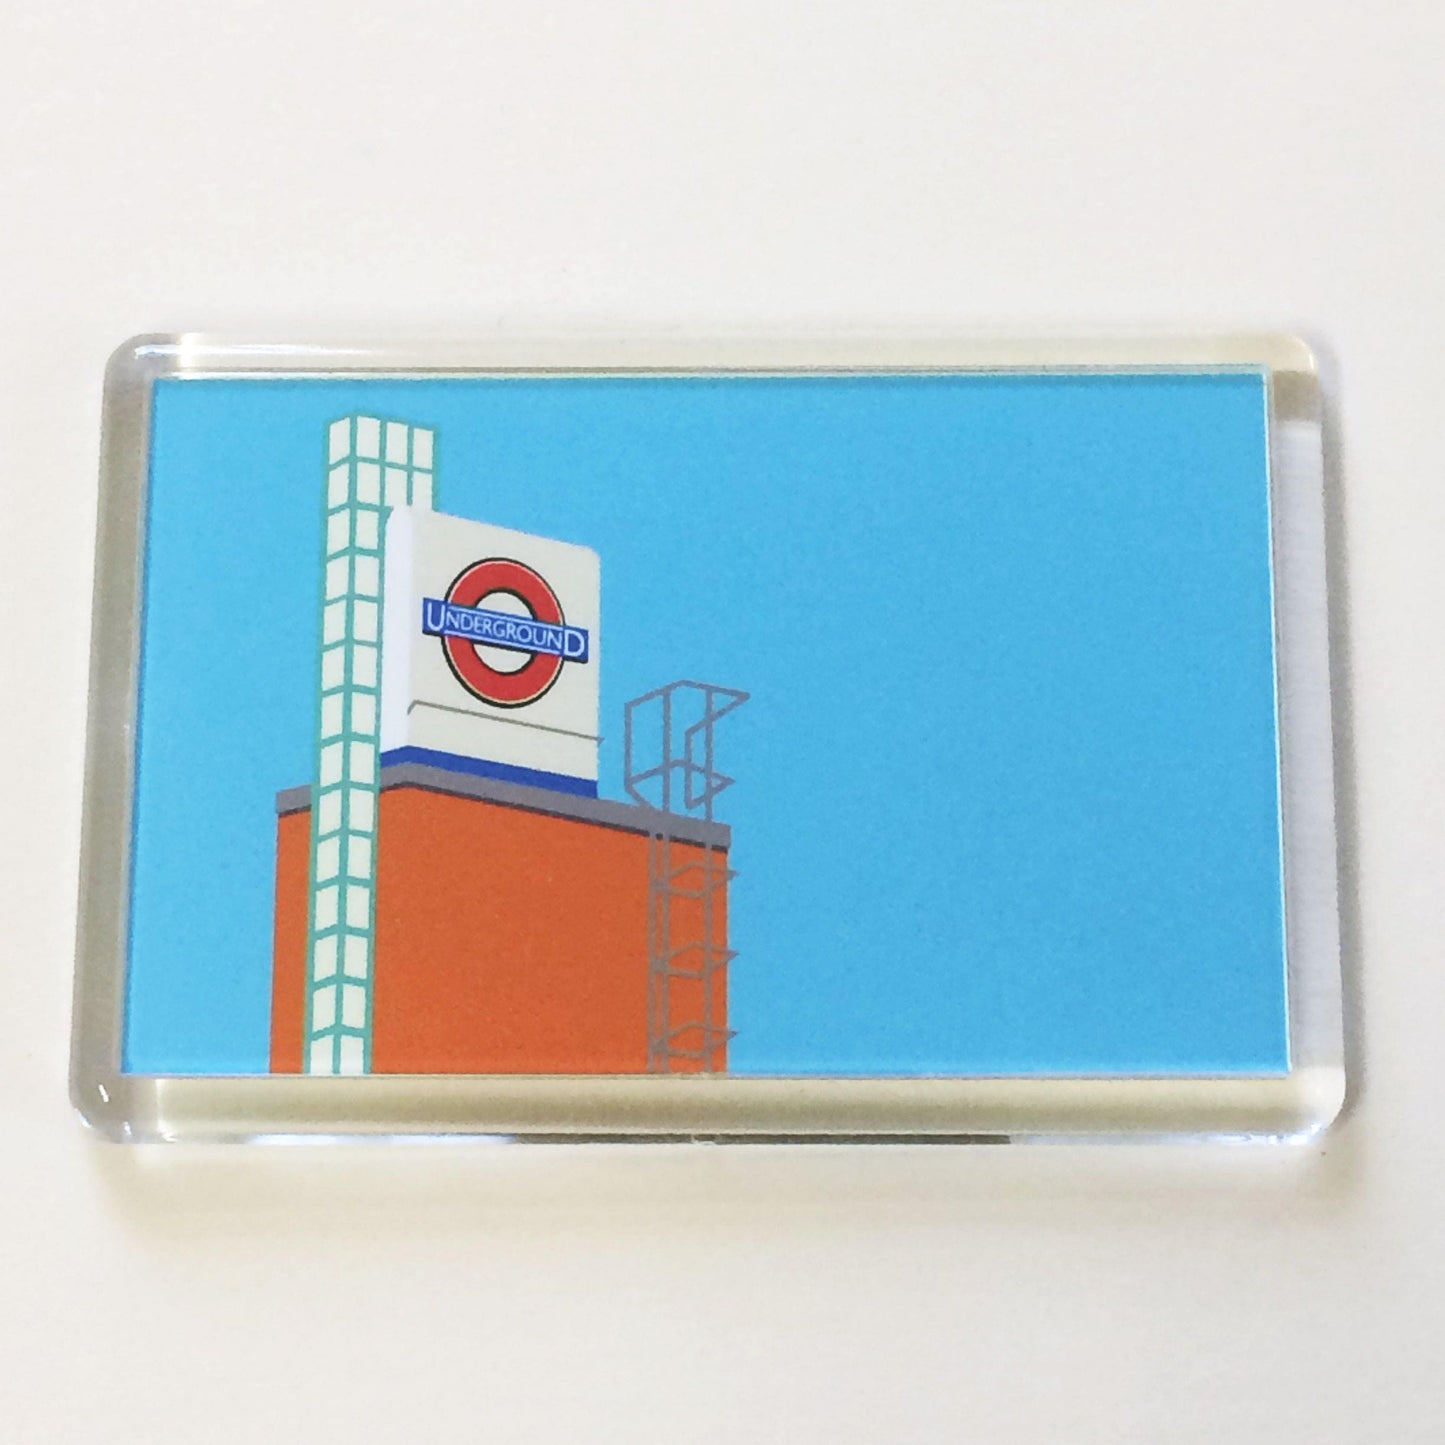 LONDON Underground Fridge magnet from the 'Art Deco Tube Stations' Collection by Rebecca Pymar